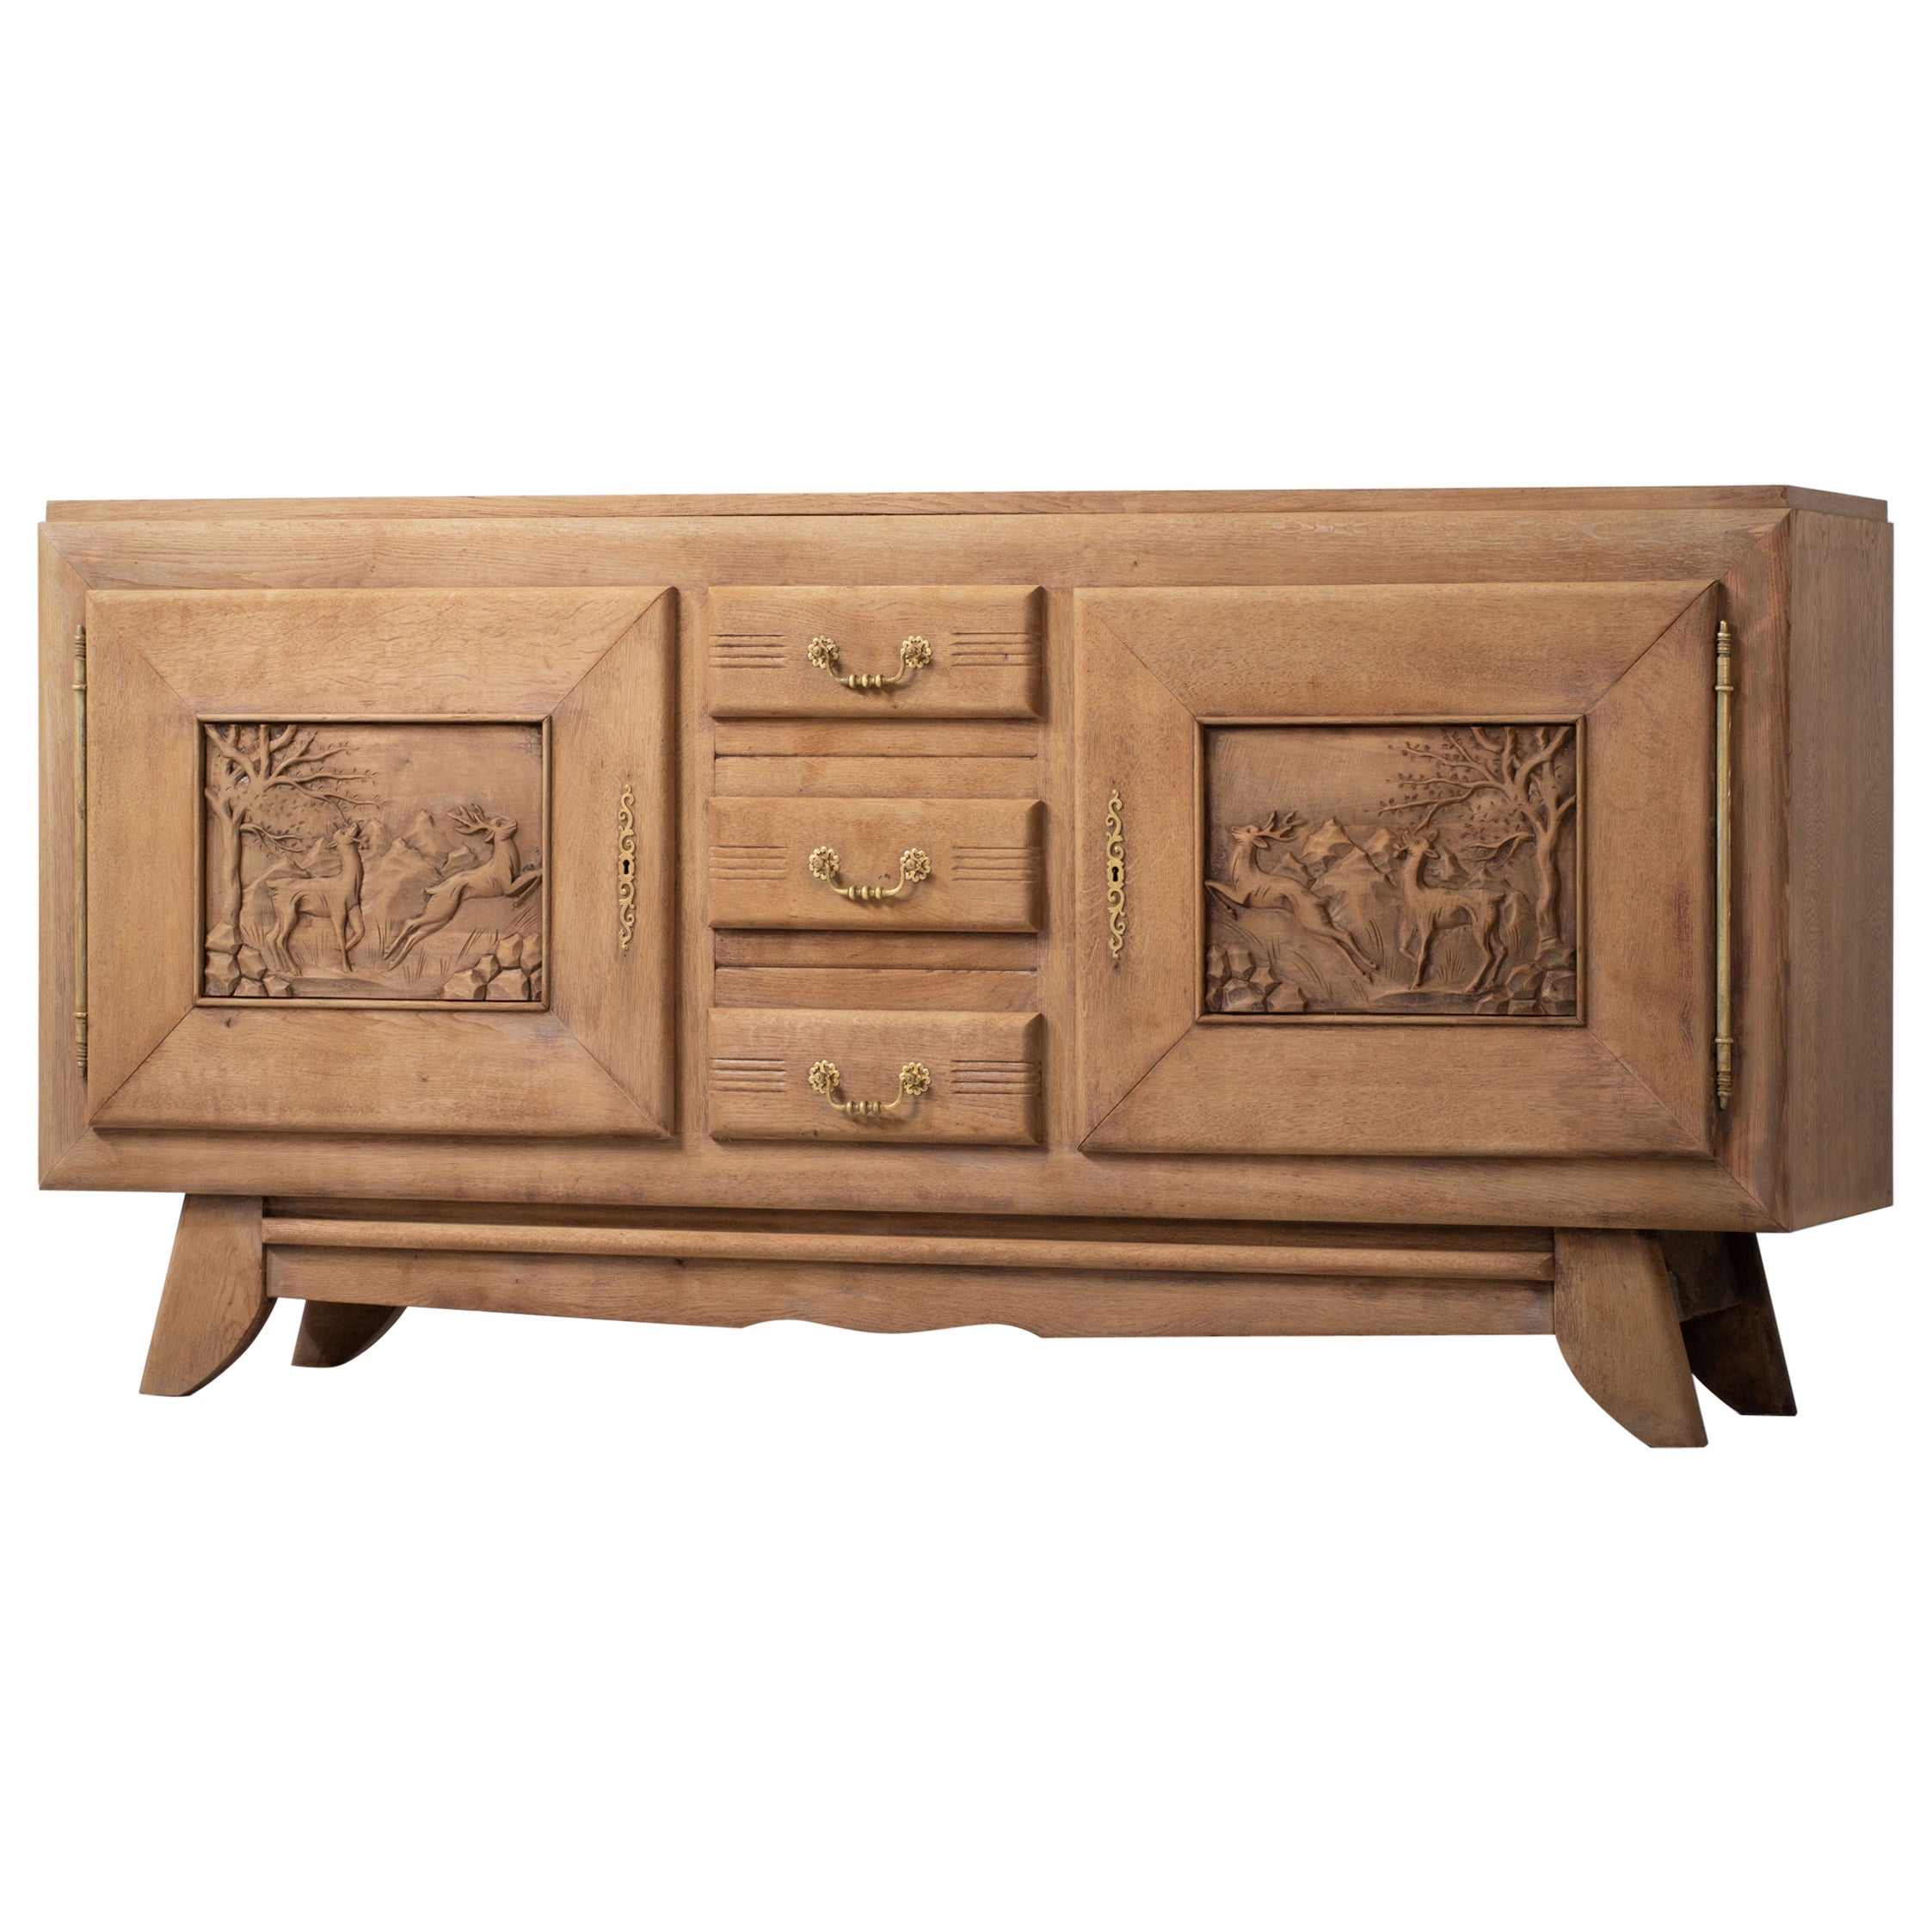 French Solid Oak Credenza, 1940s